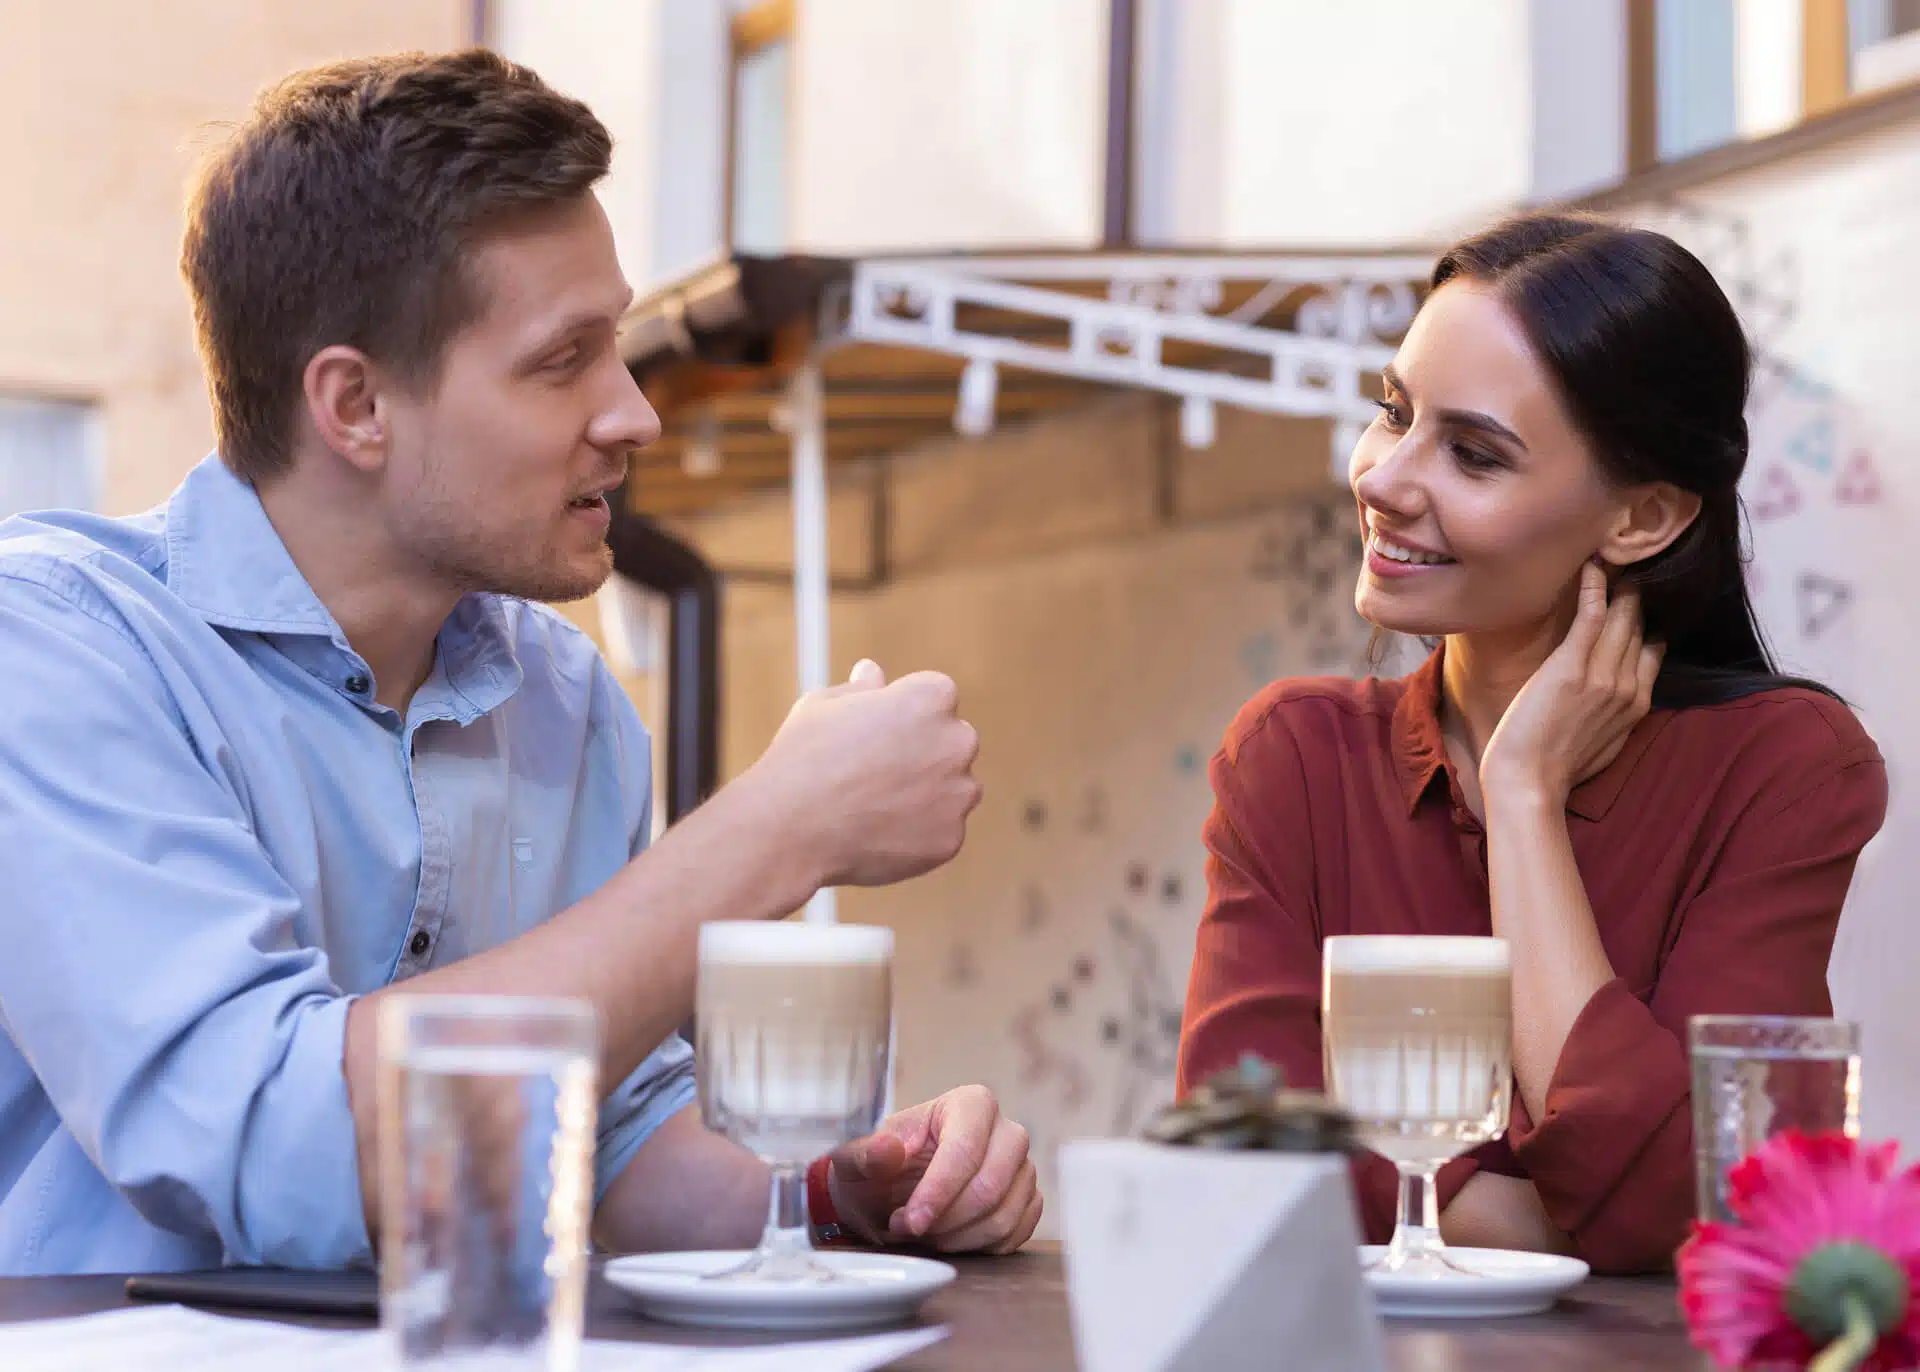 woman admiring a man on a date